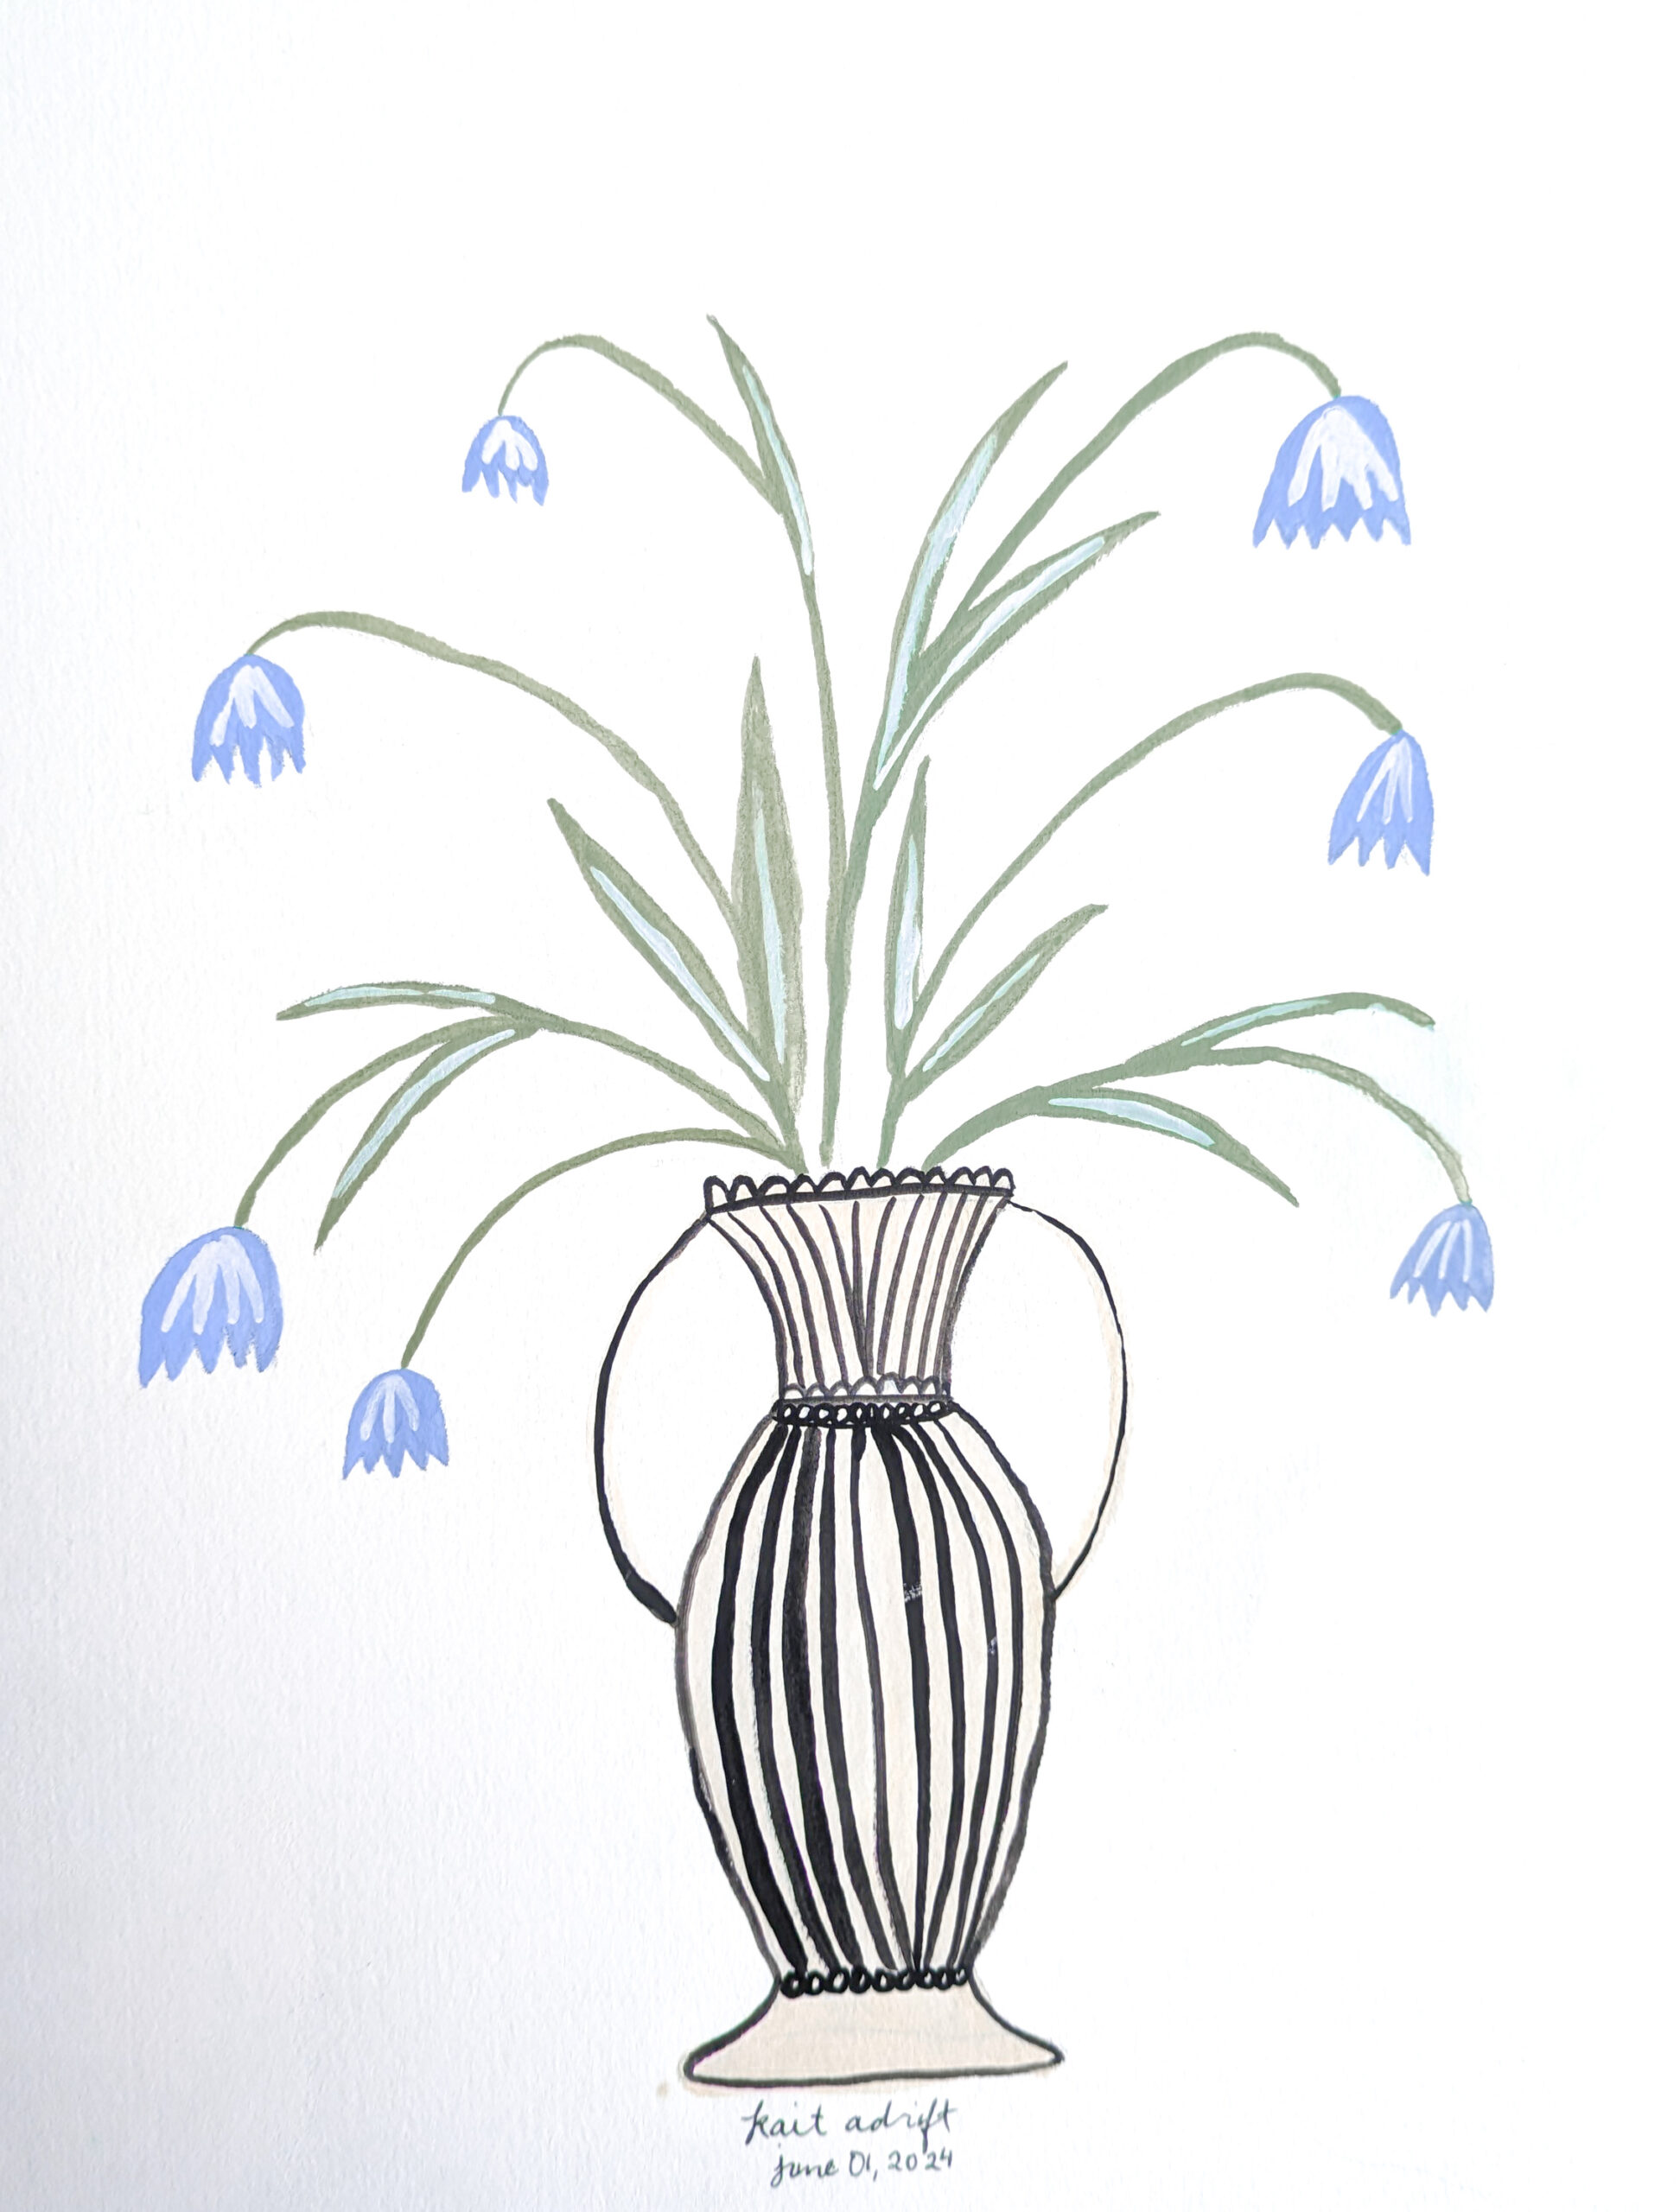 Gouache painting of a tall vase with drooping blue flowers and olive green leaves